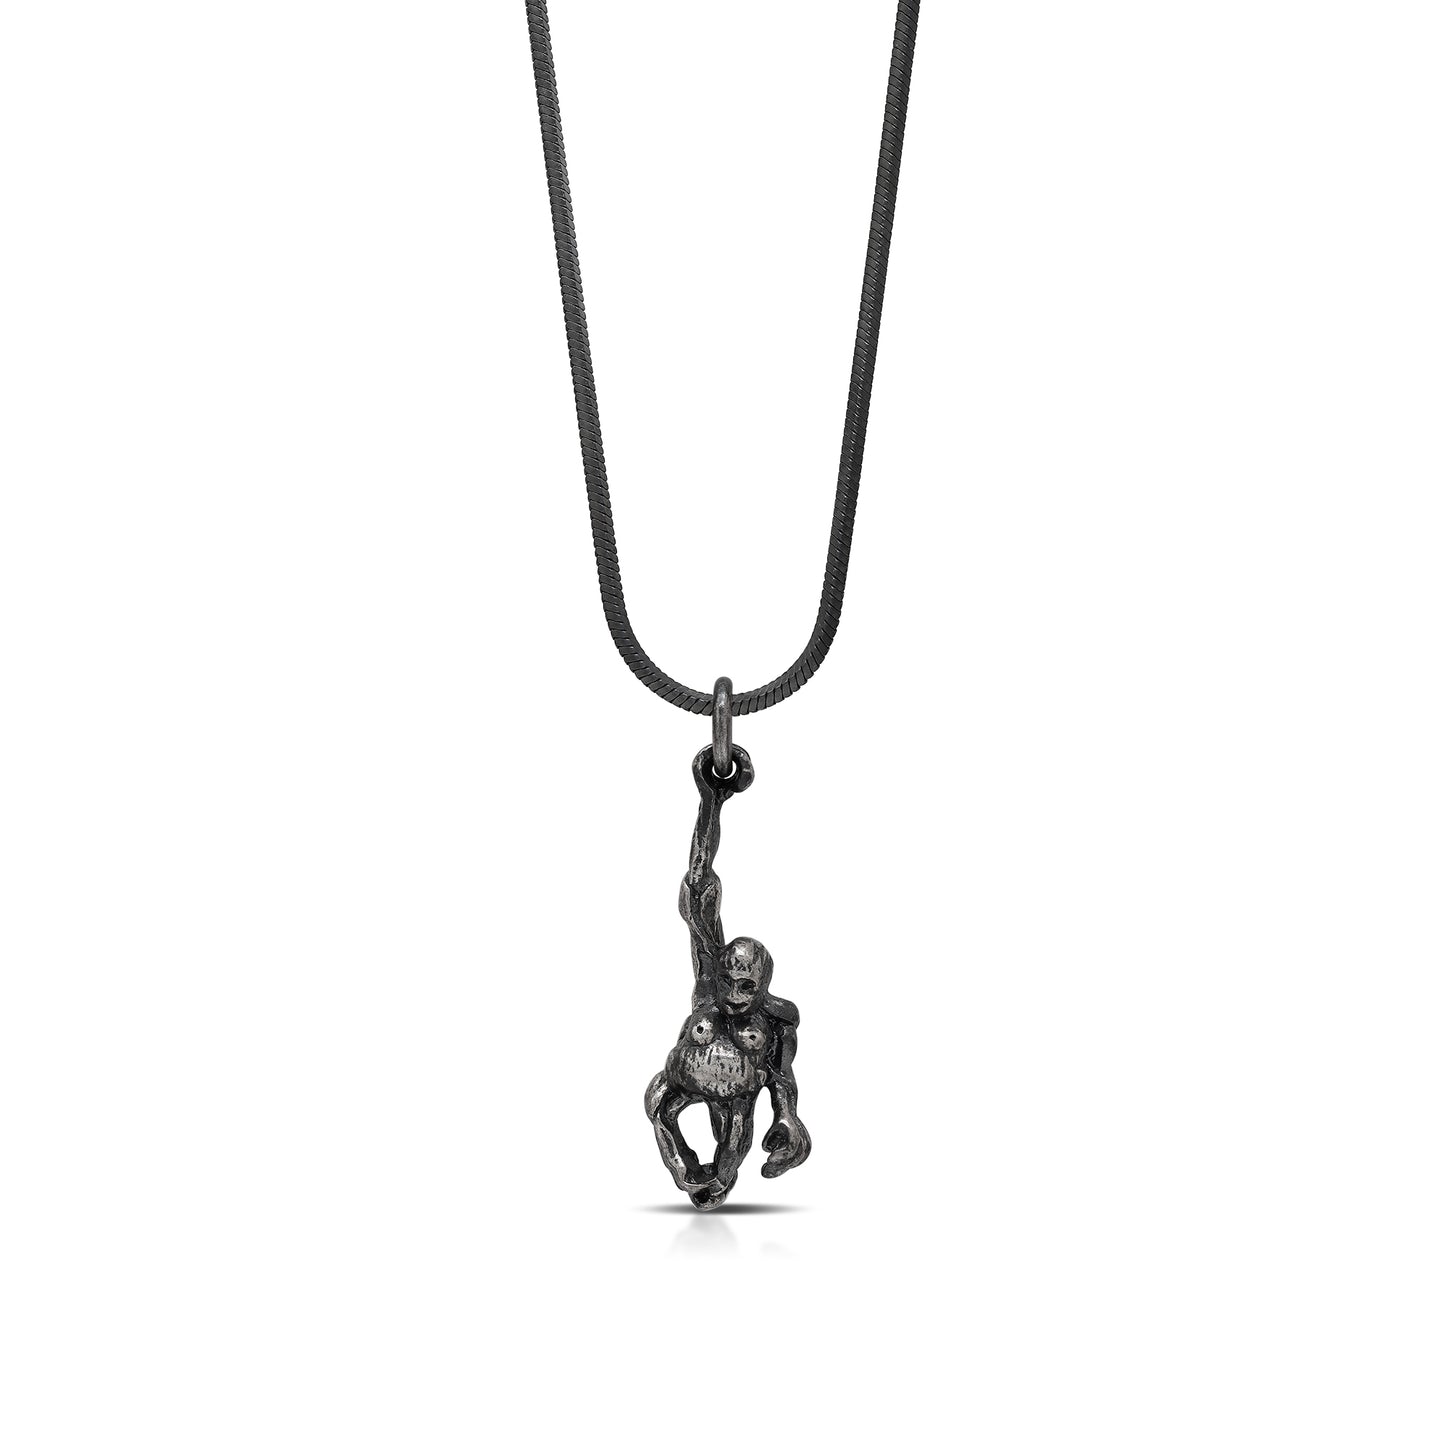 Orangutan Origami with Snake Chain Necklace